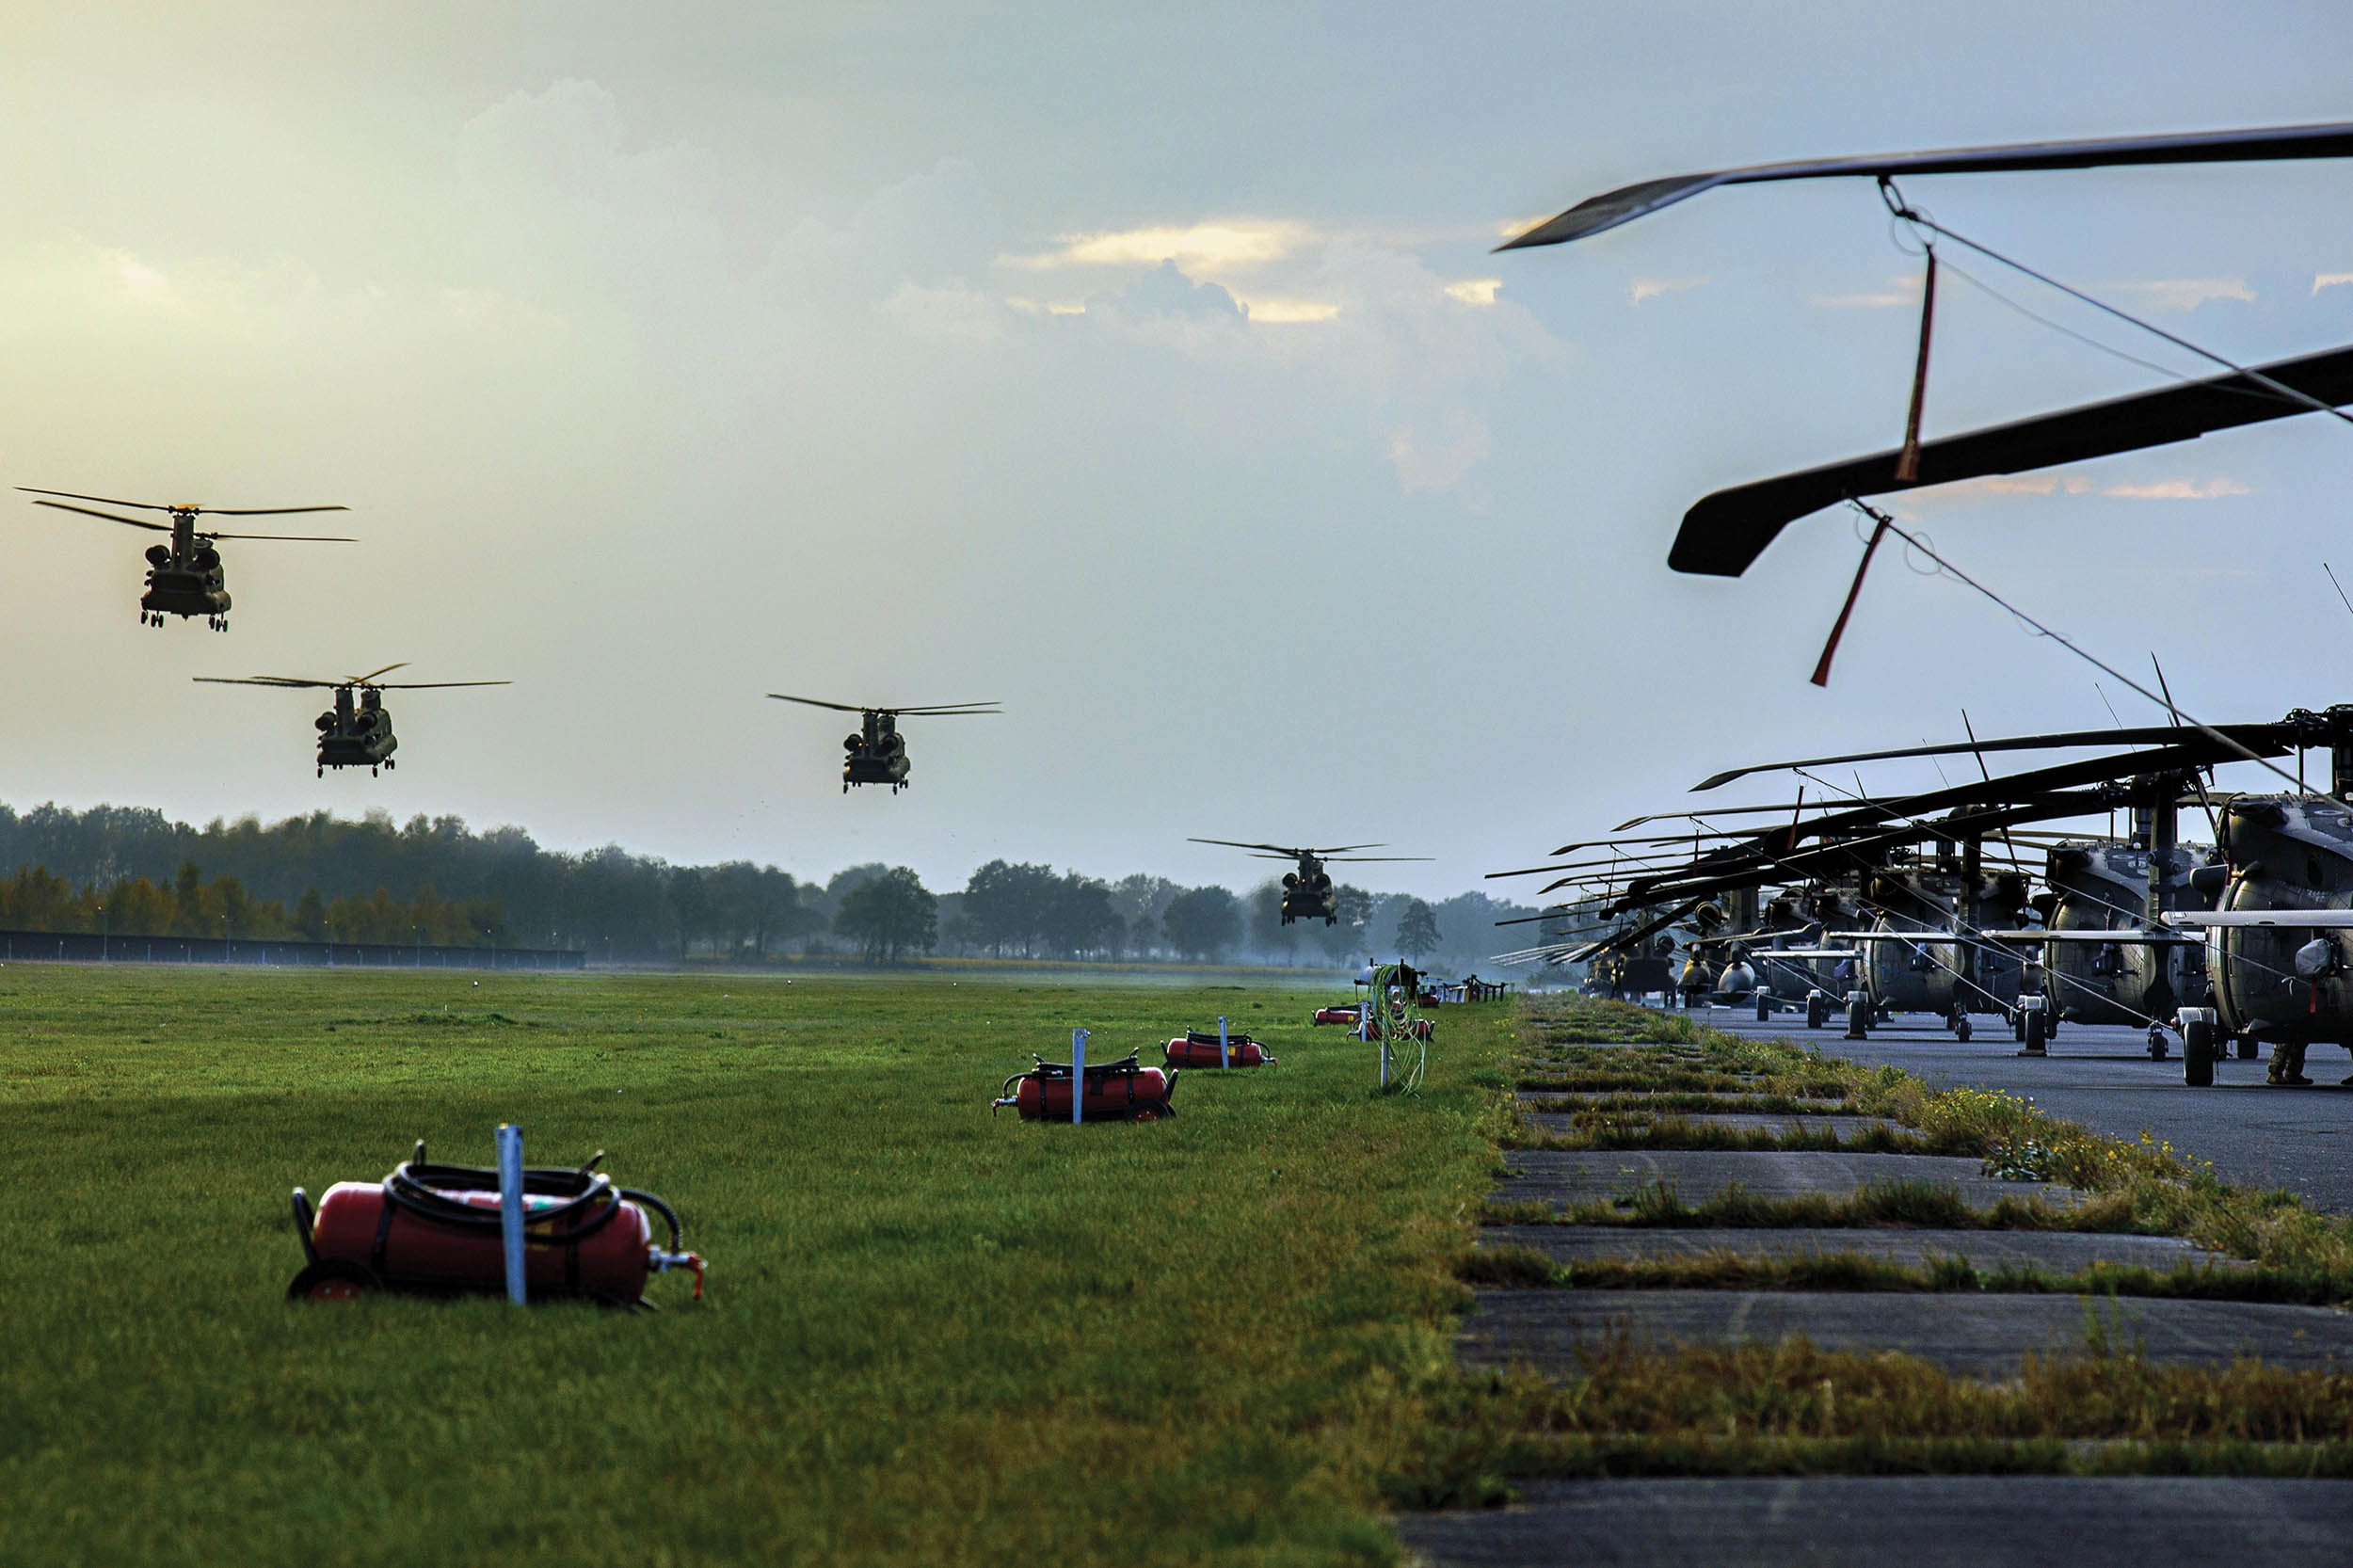 Four Army CH-47F Chinook helicopters from 1st Battalion, 214th Aviation Regiment (General Support Aviation Battalion), 12th Combat Aviation Brigade, prepare to land during exercise Falcon Autumn 22 at Vredepeel, Netherlands, November 4, 2022 (U.S. Army/Thomas Mort)